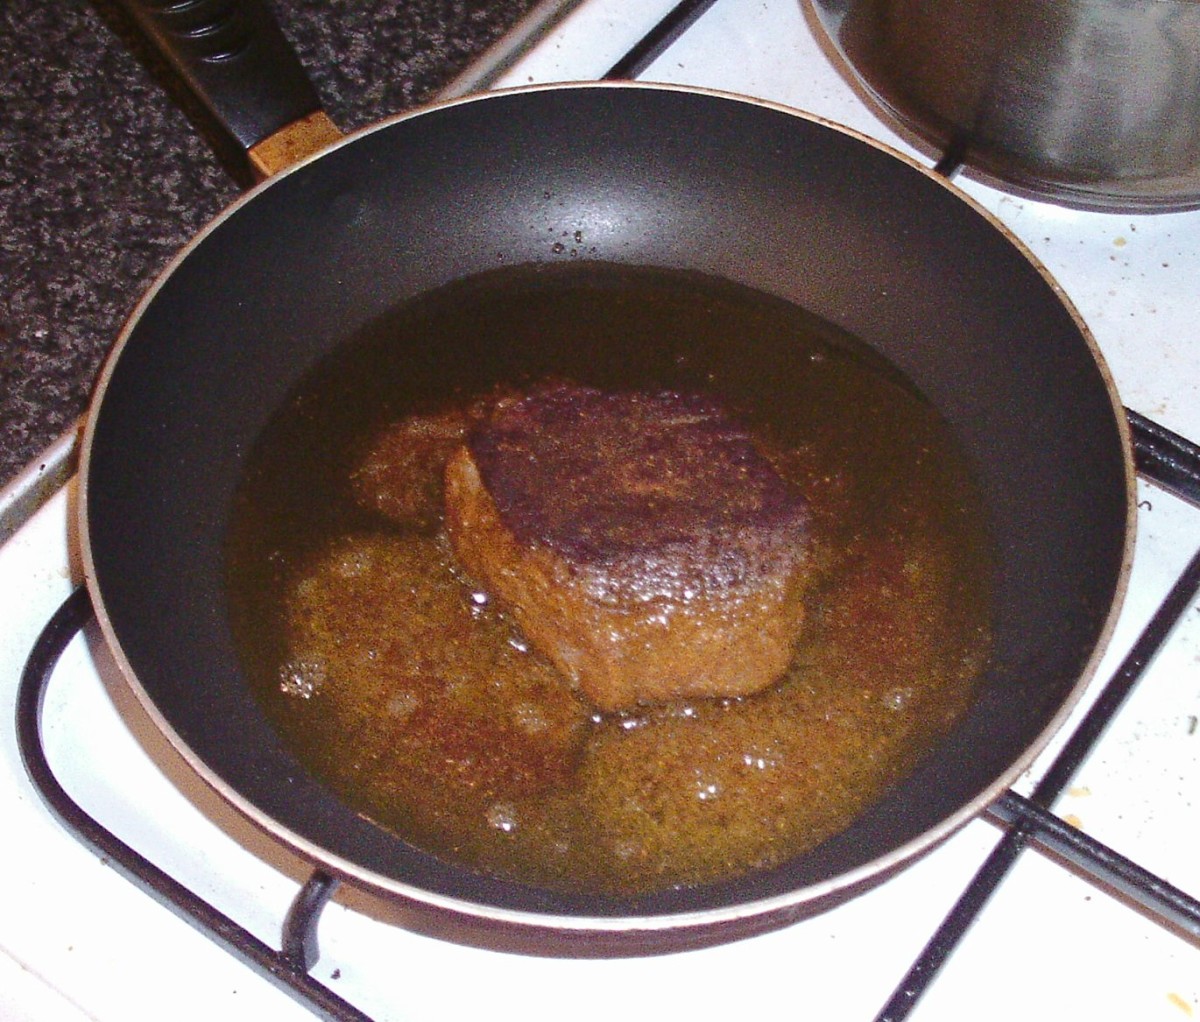 Ostrich steak is turned to fry on second side.